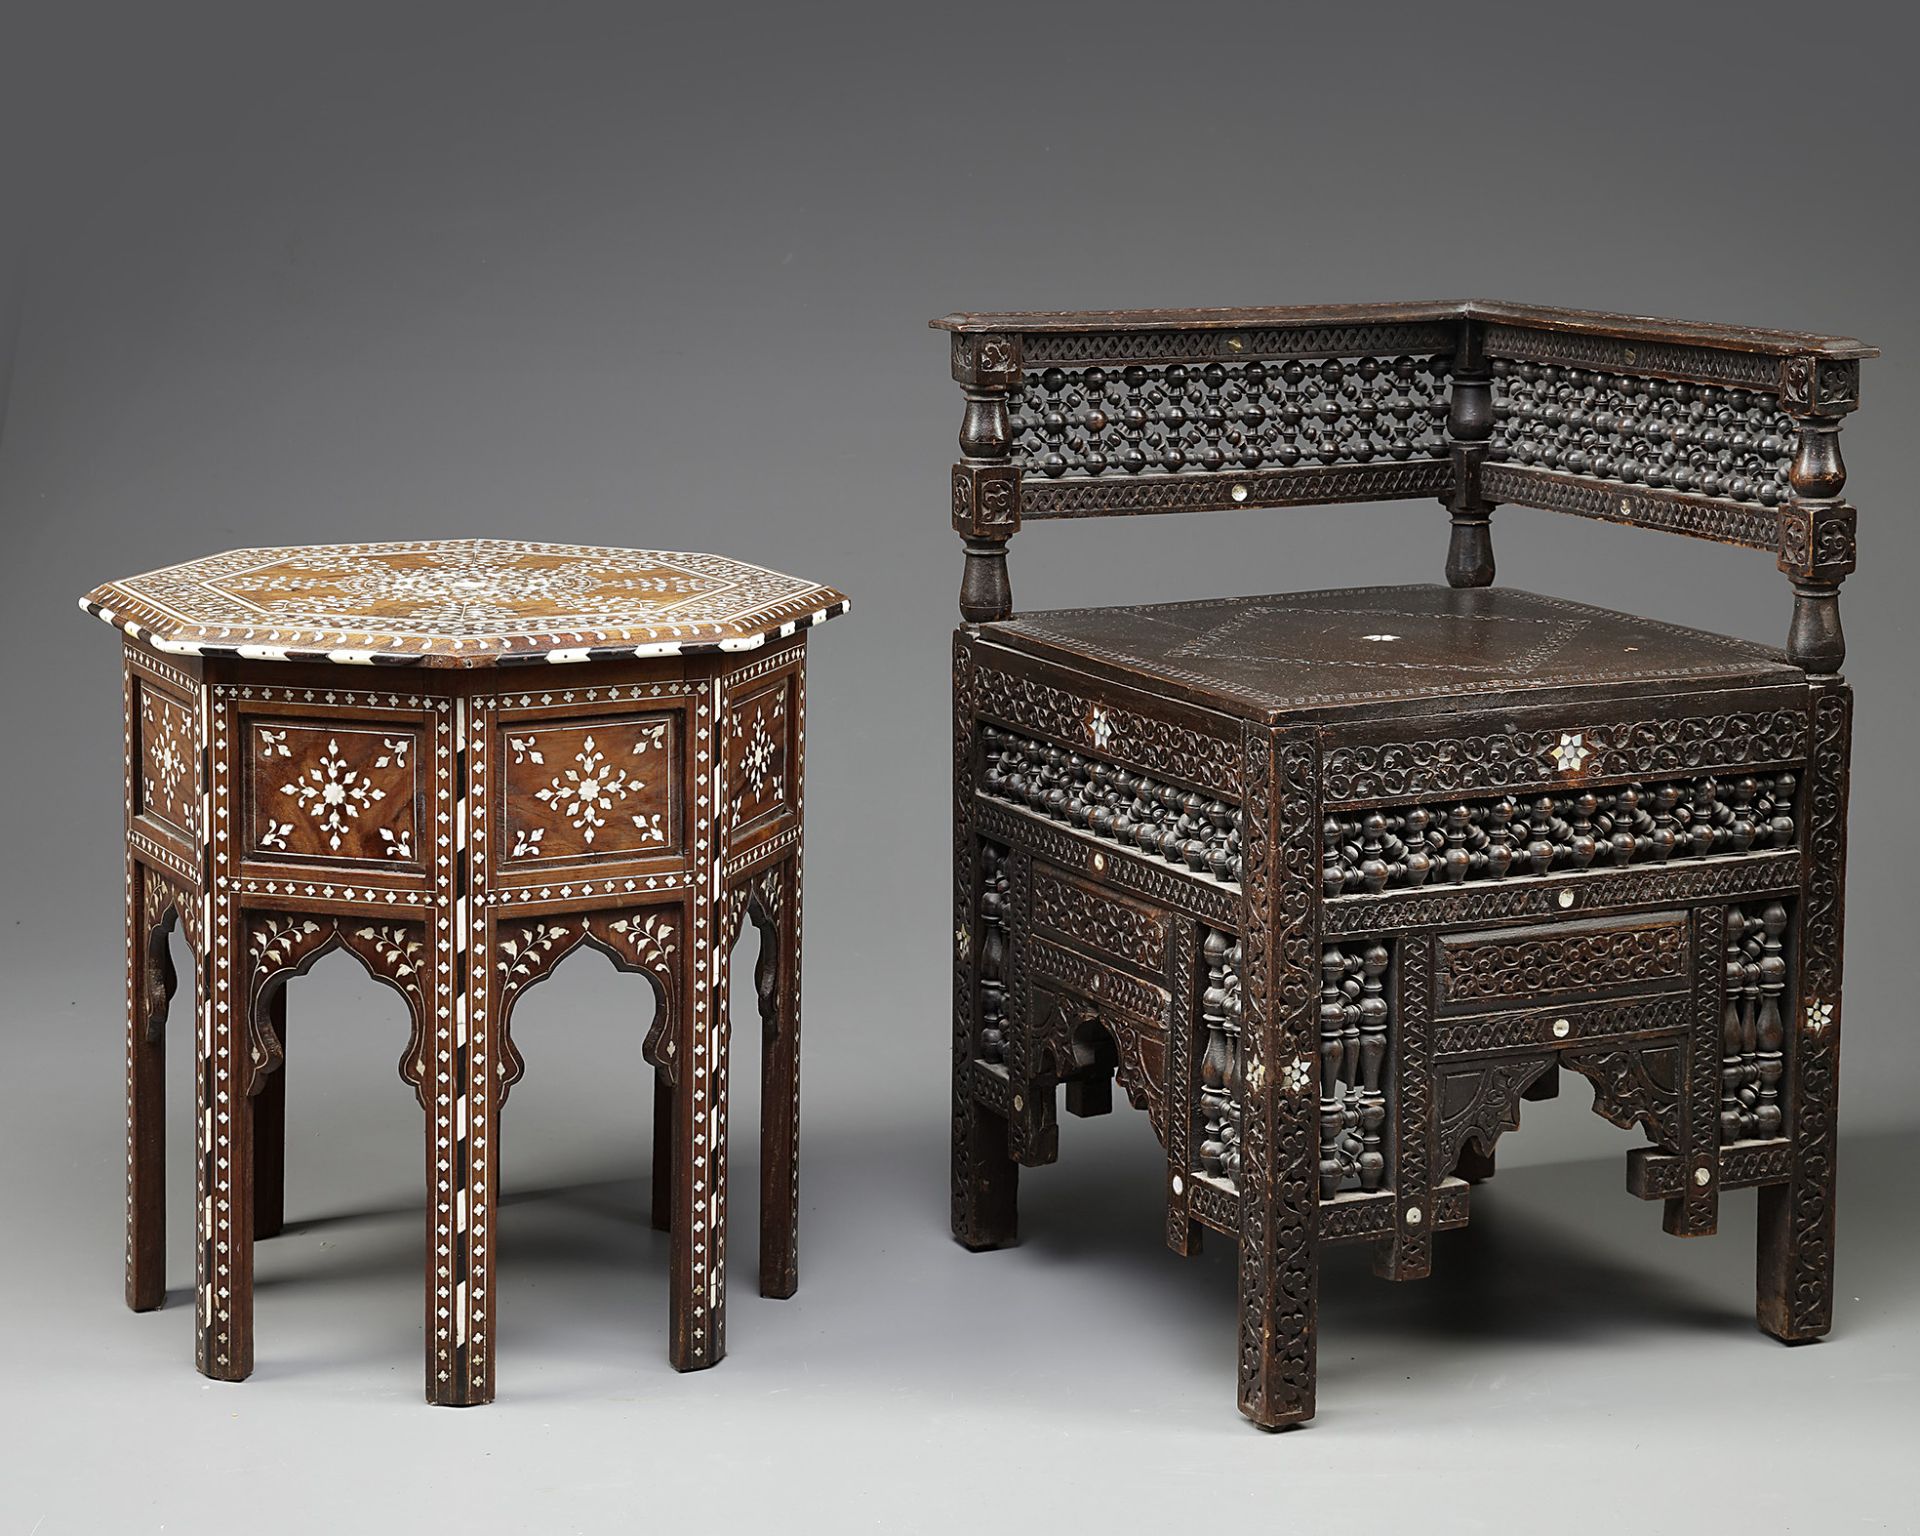 An Islamic table and a square chair